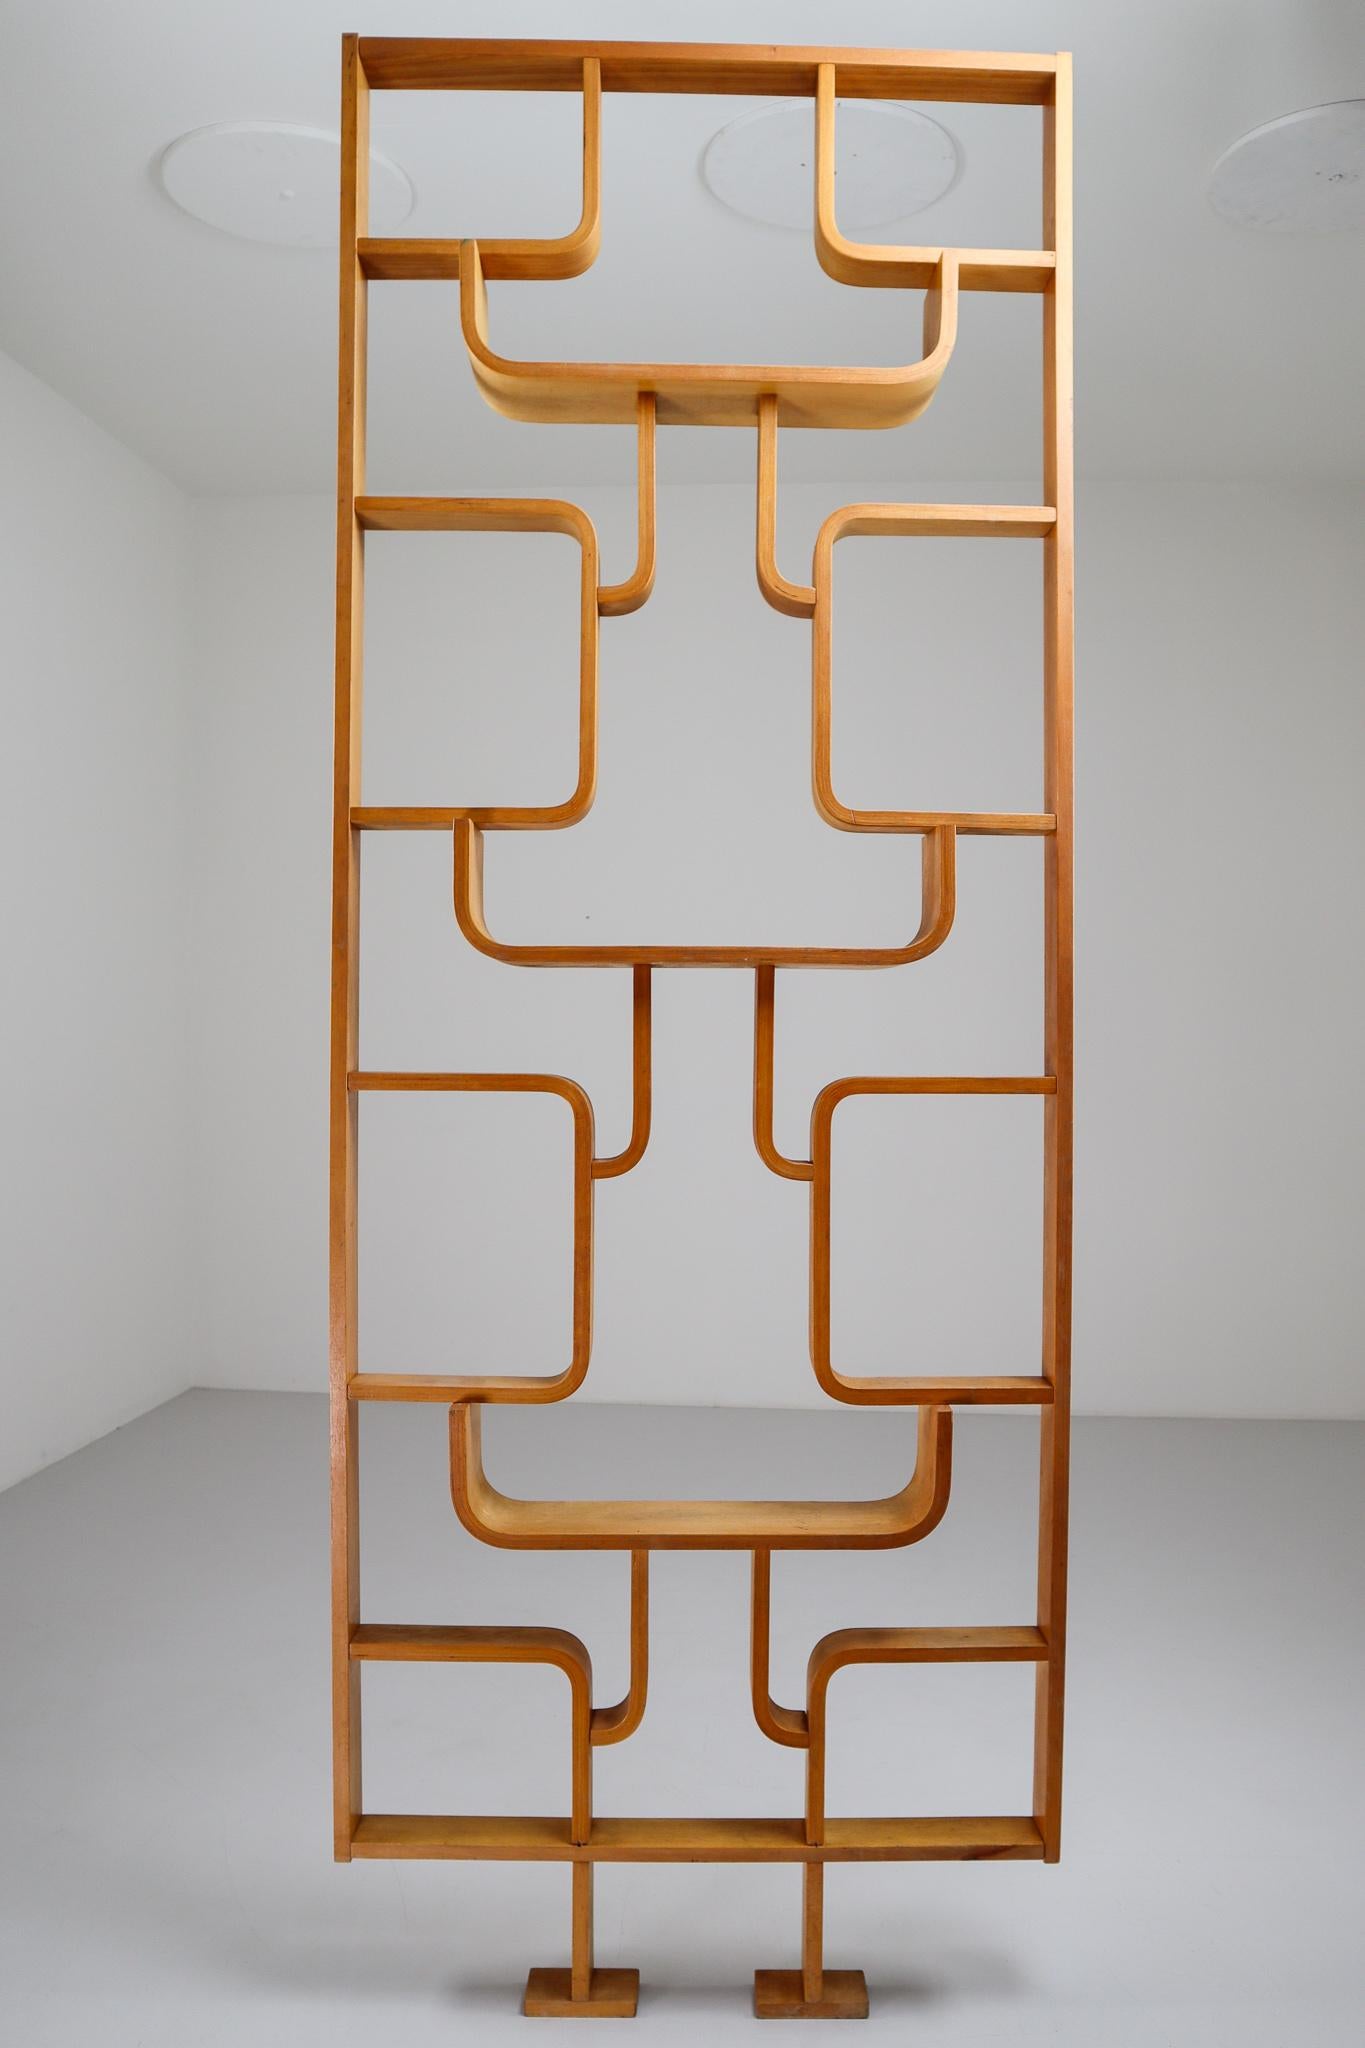 A unique 1960s piece of Czech design, part of a limited five year production. Can be used as a wall-mounted shelving unit or room divider. Square edges in blond color plywood and features geometric patterns. Designed by Ludvik Volak in the Czech